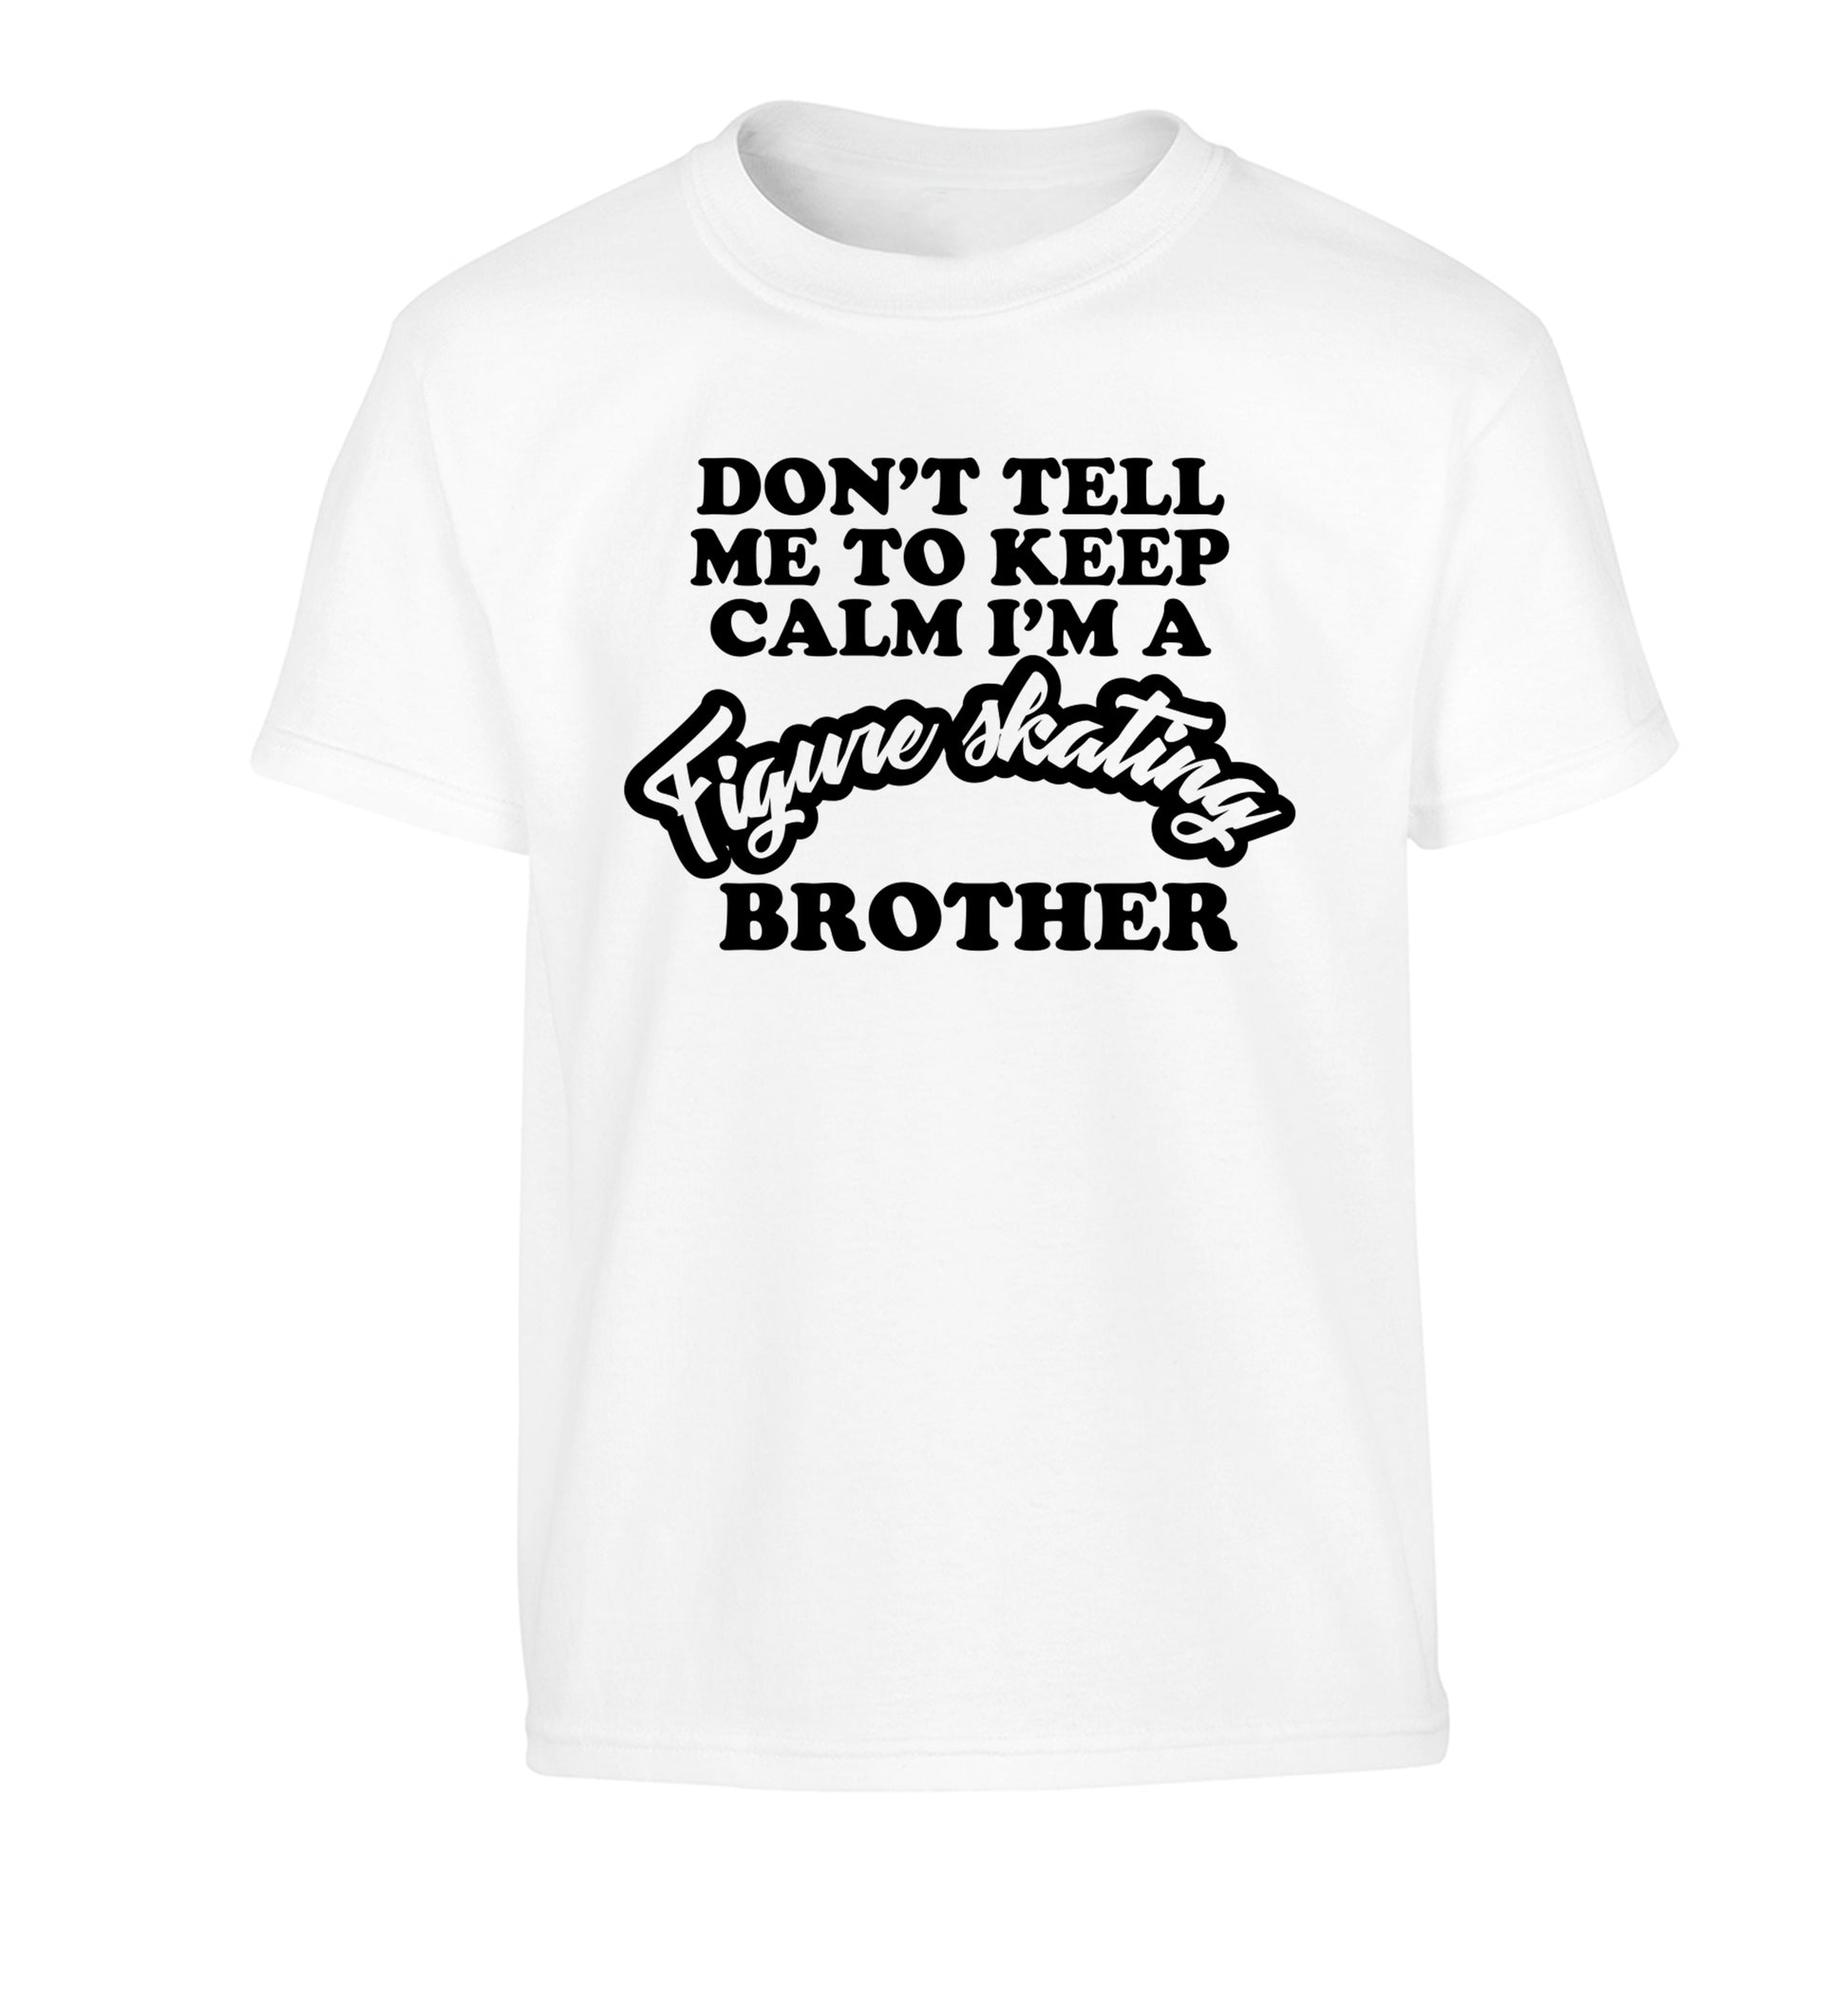 Don't tell me to keep calm I'm a figure skating brother Children's white Tshirt 12-14 Years